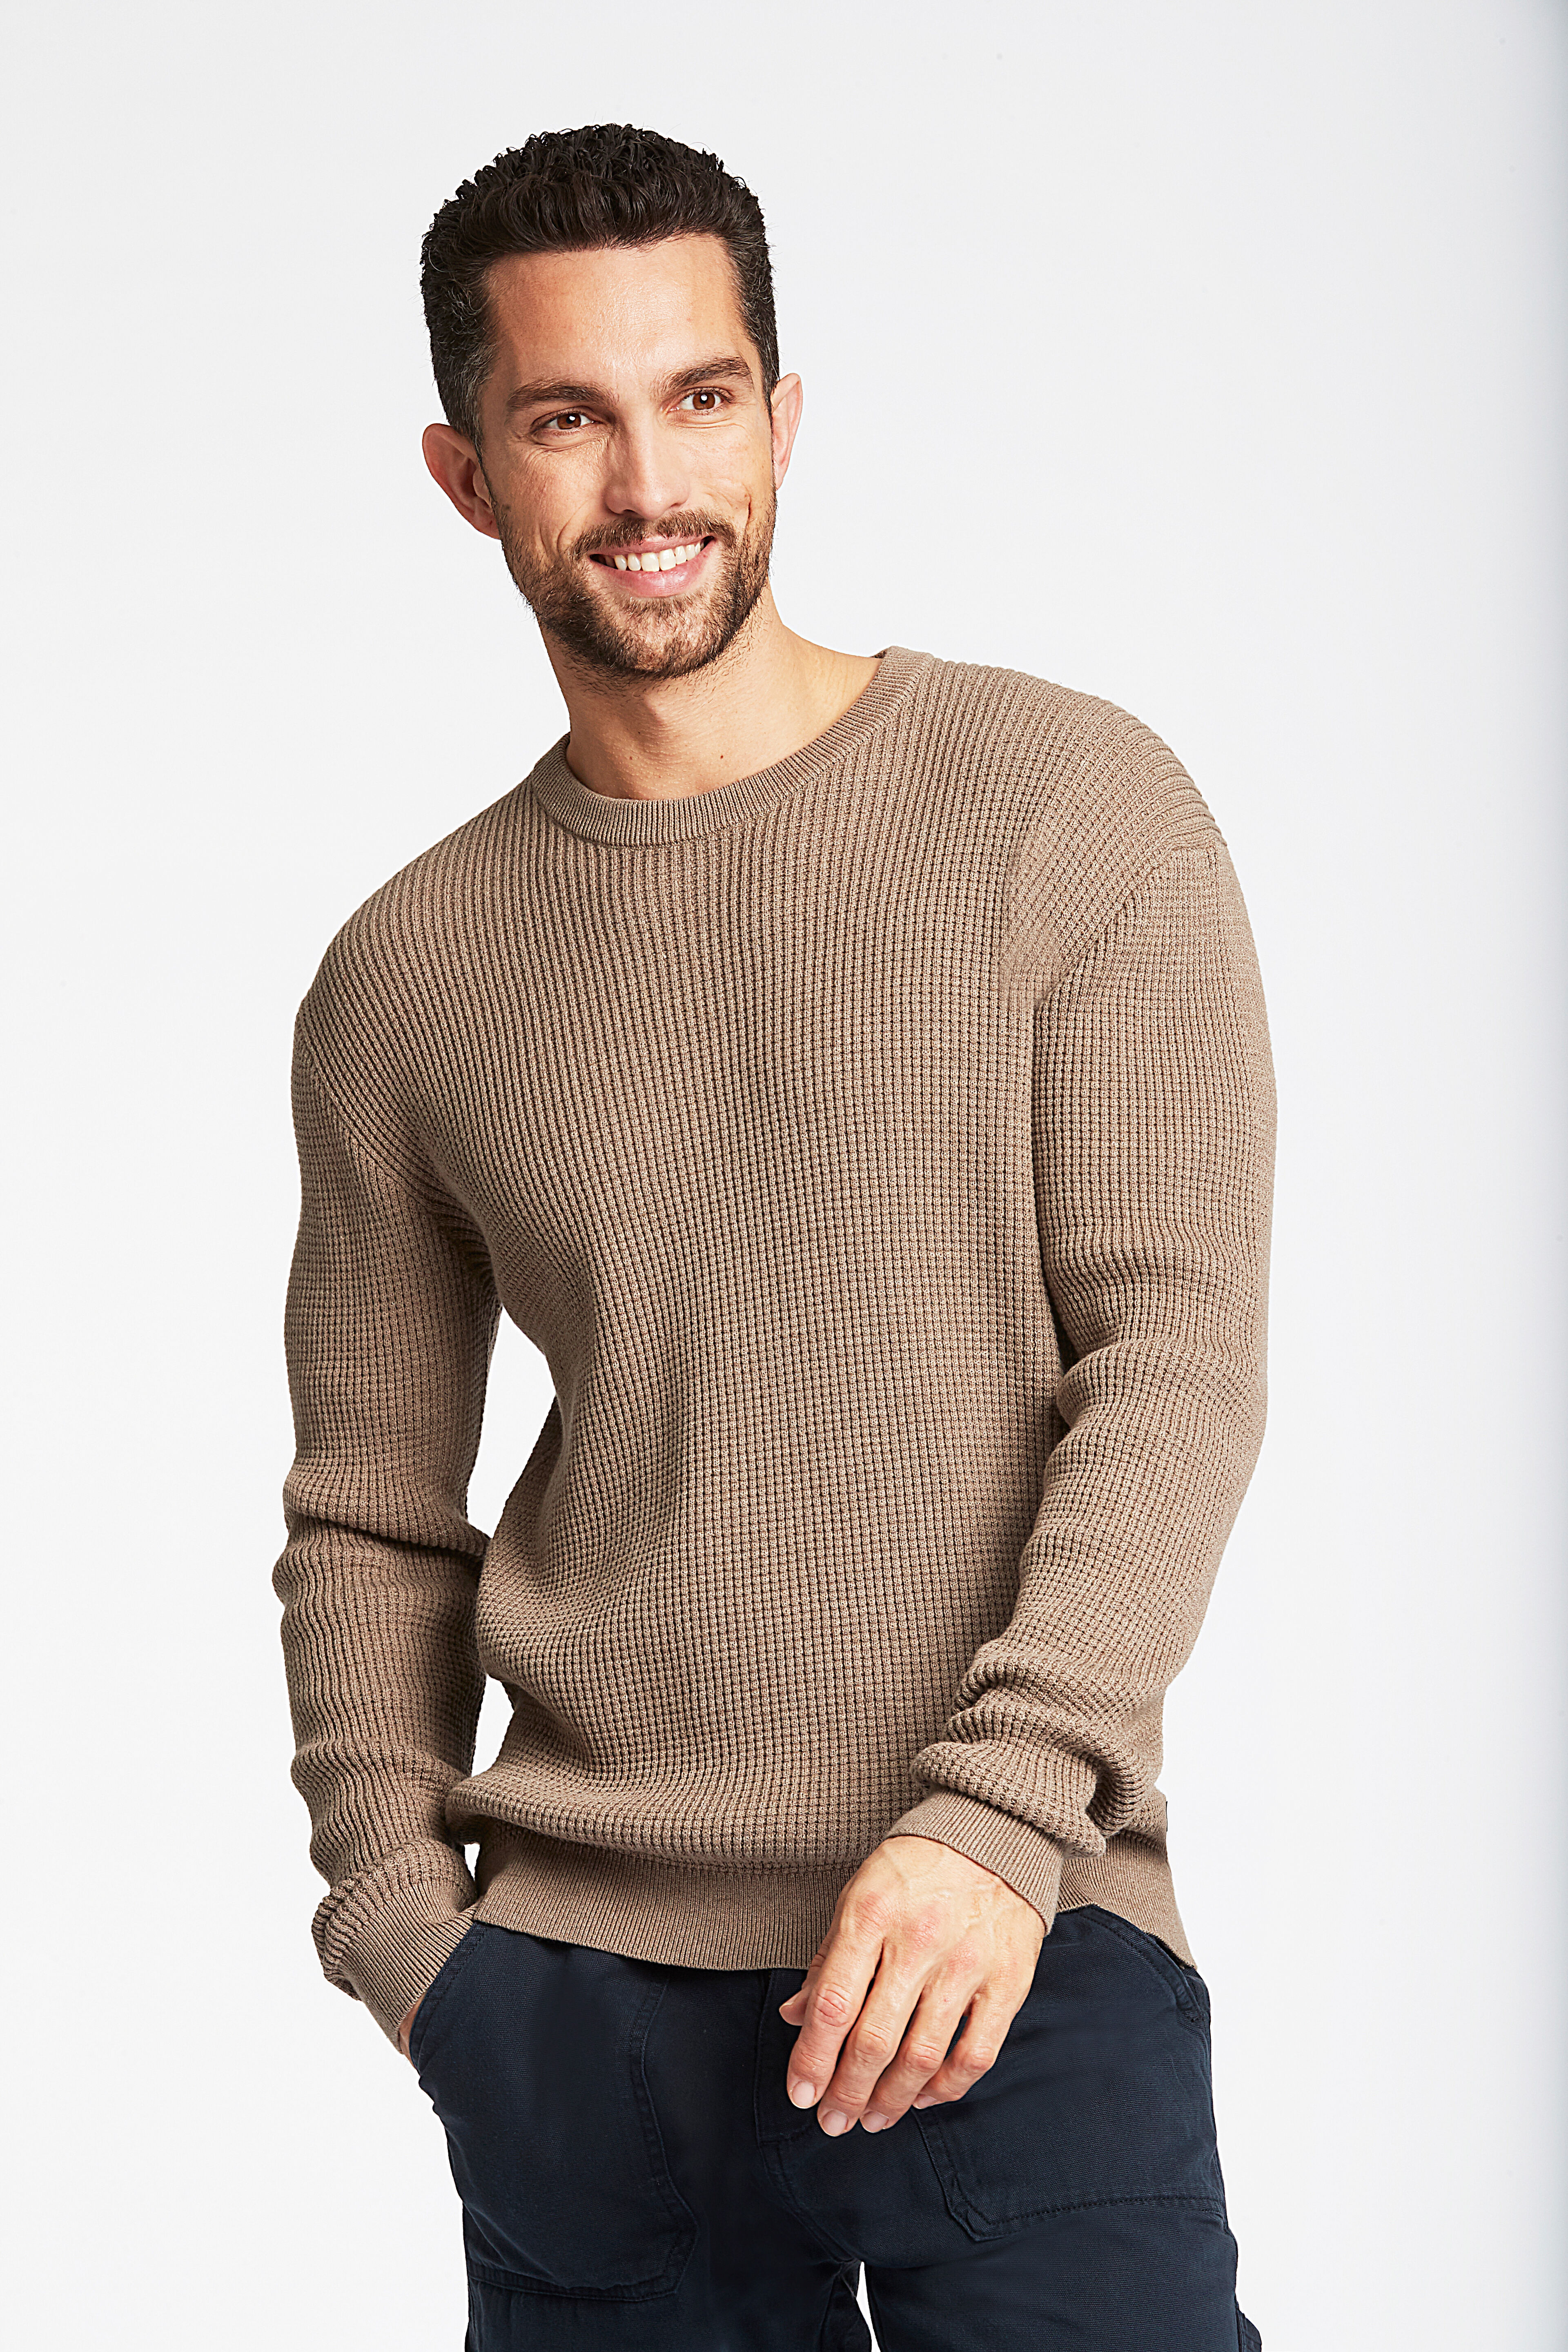 Knitwear | Relaxed fit